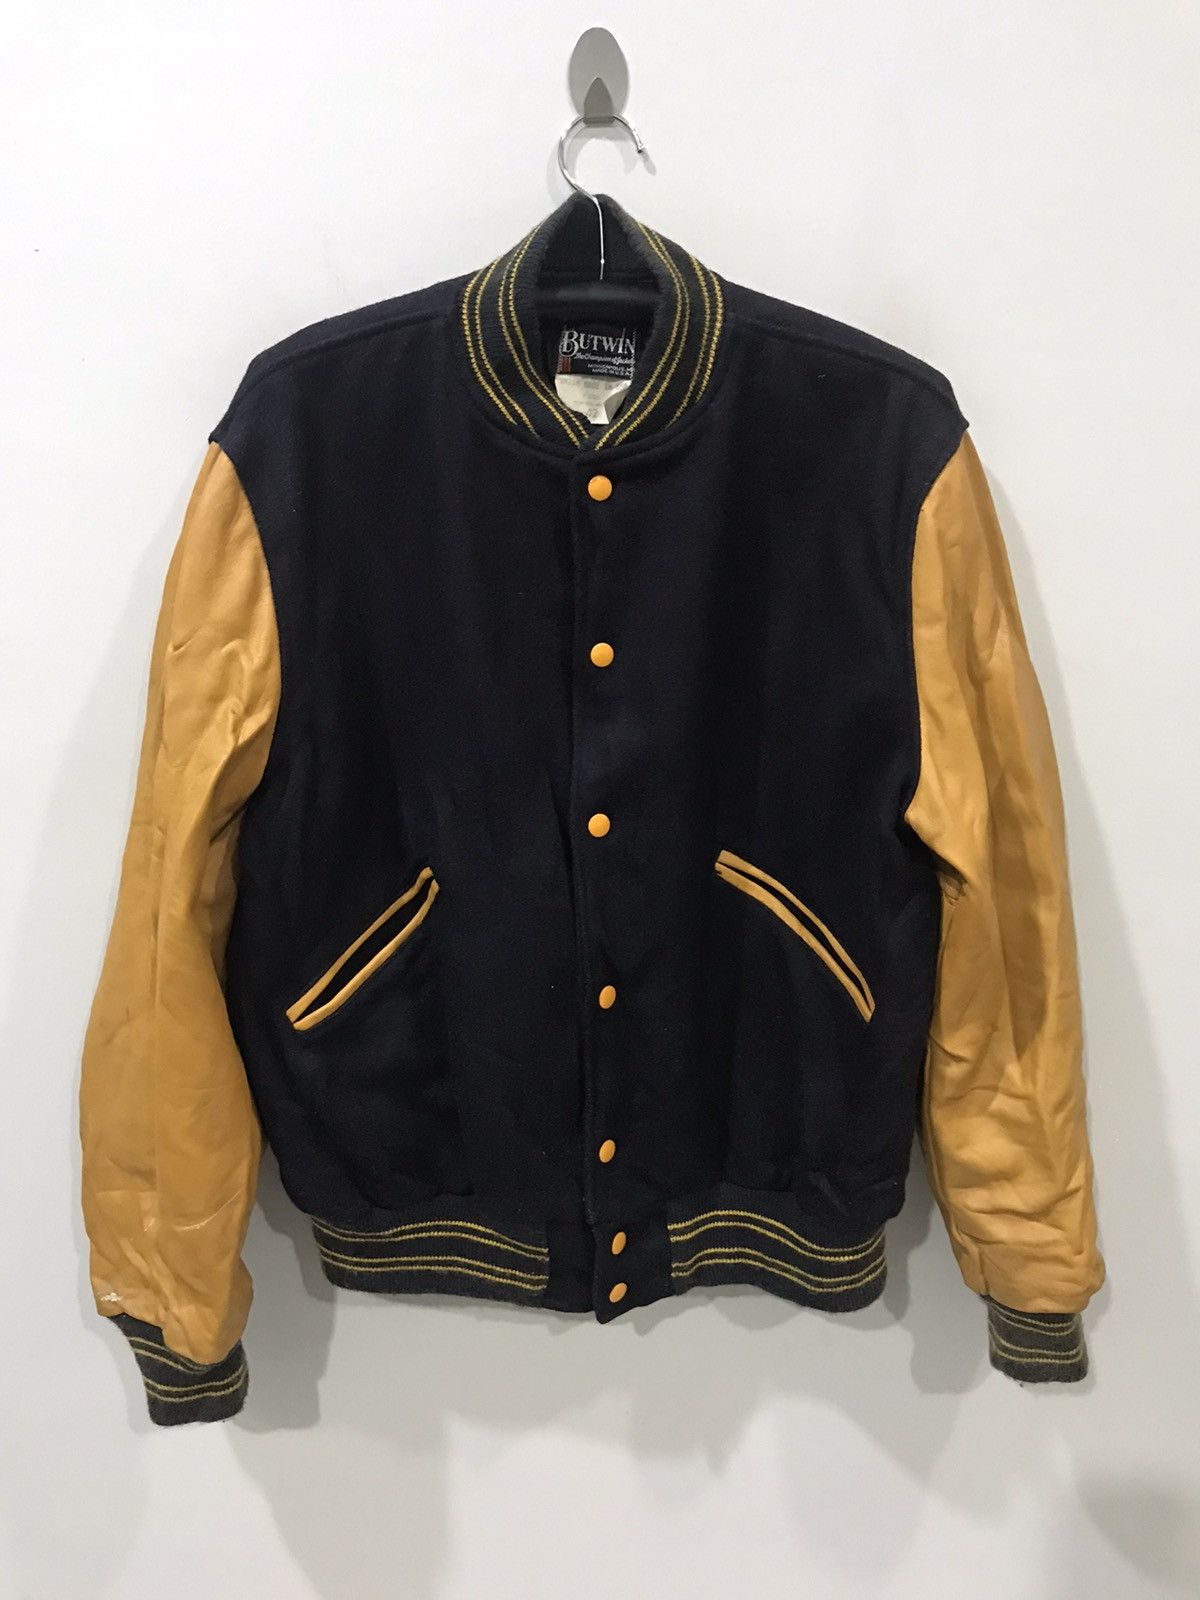 Vintage Vintage BUTWIN USA Made For Champion Varsity Jacket | Grailed